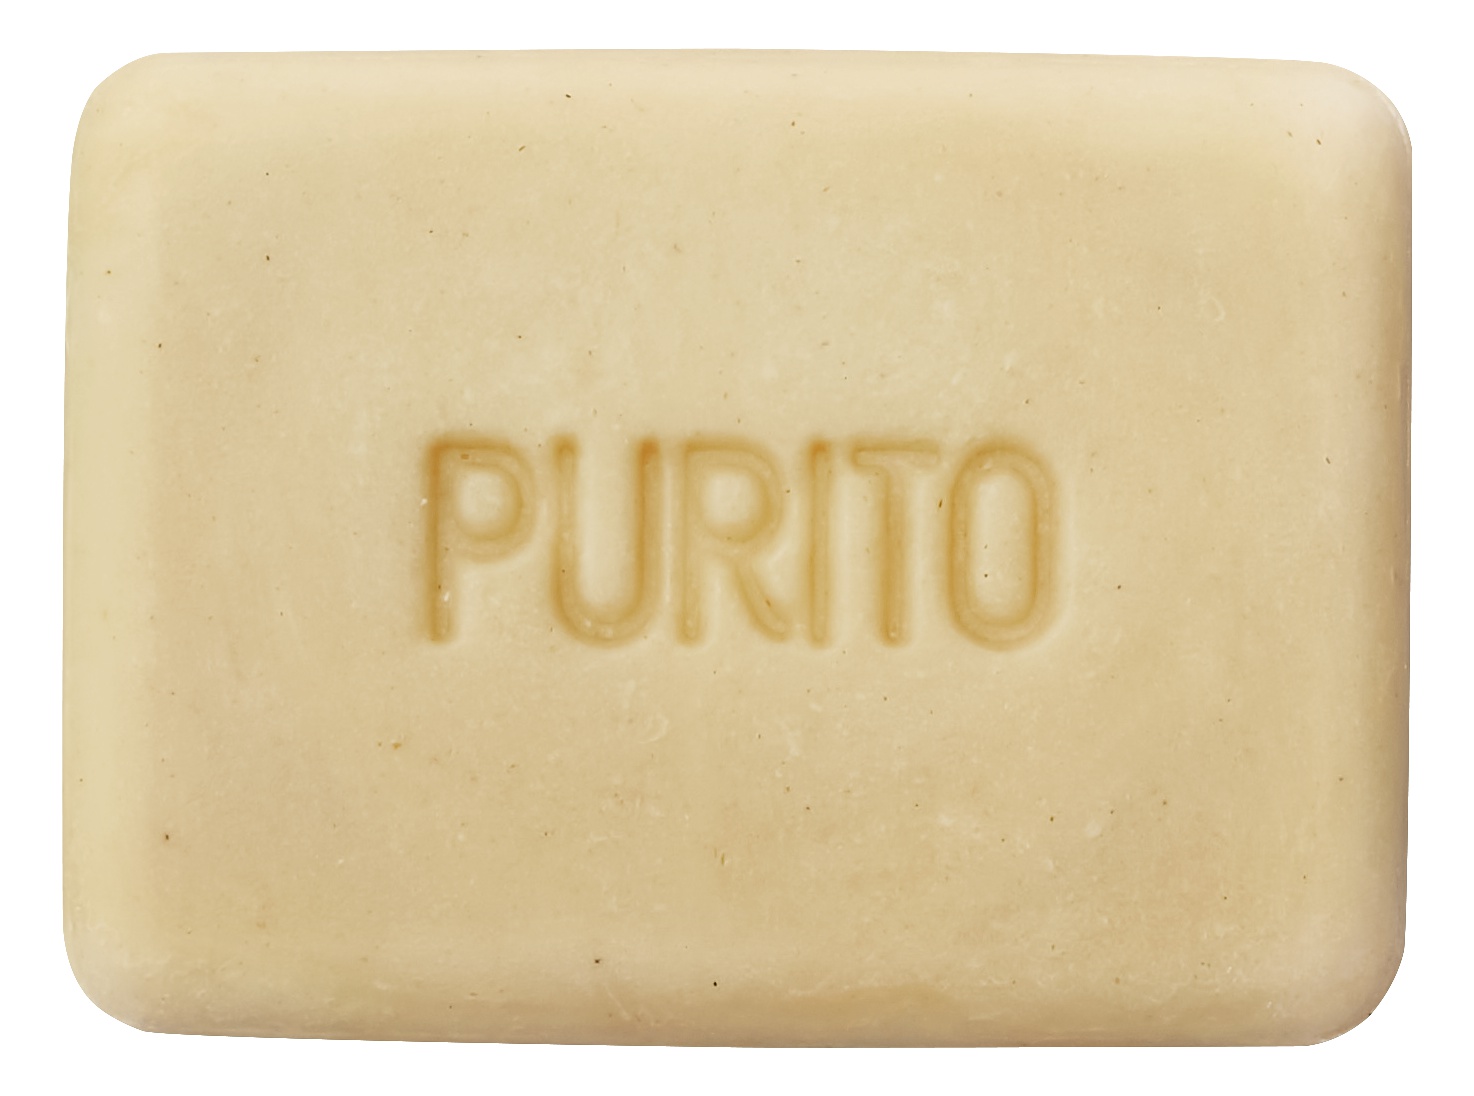 Purito Re:store Cleansing Bar